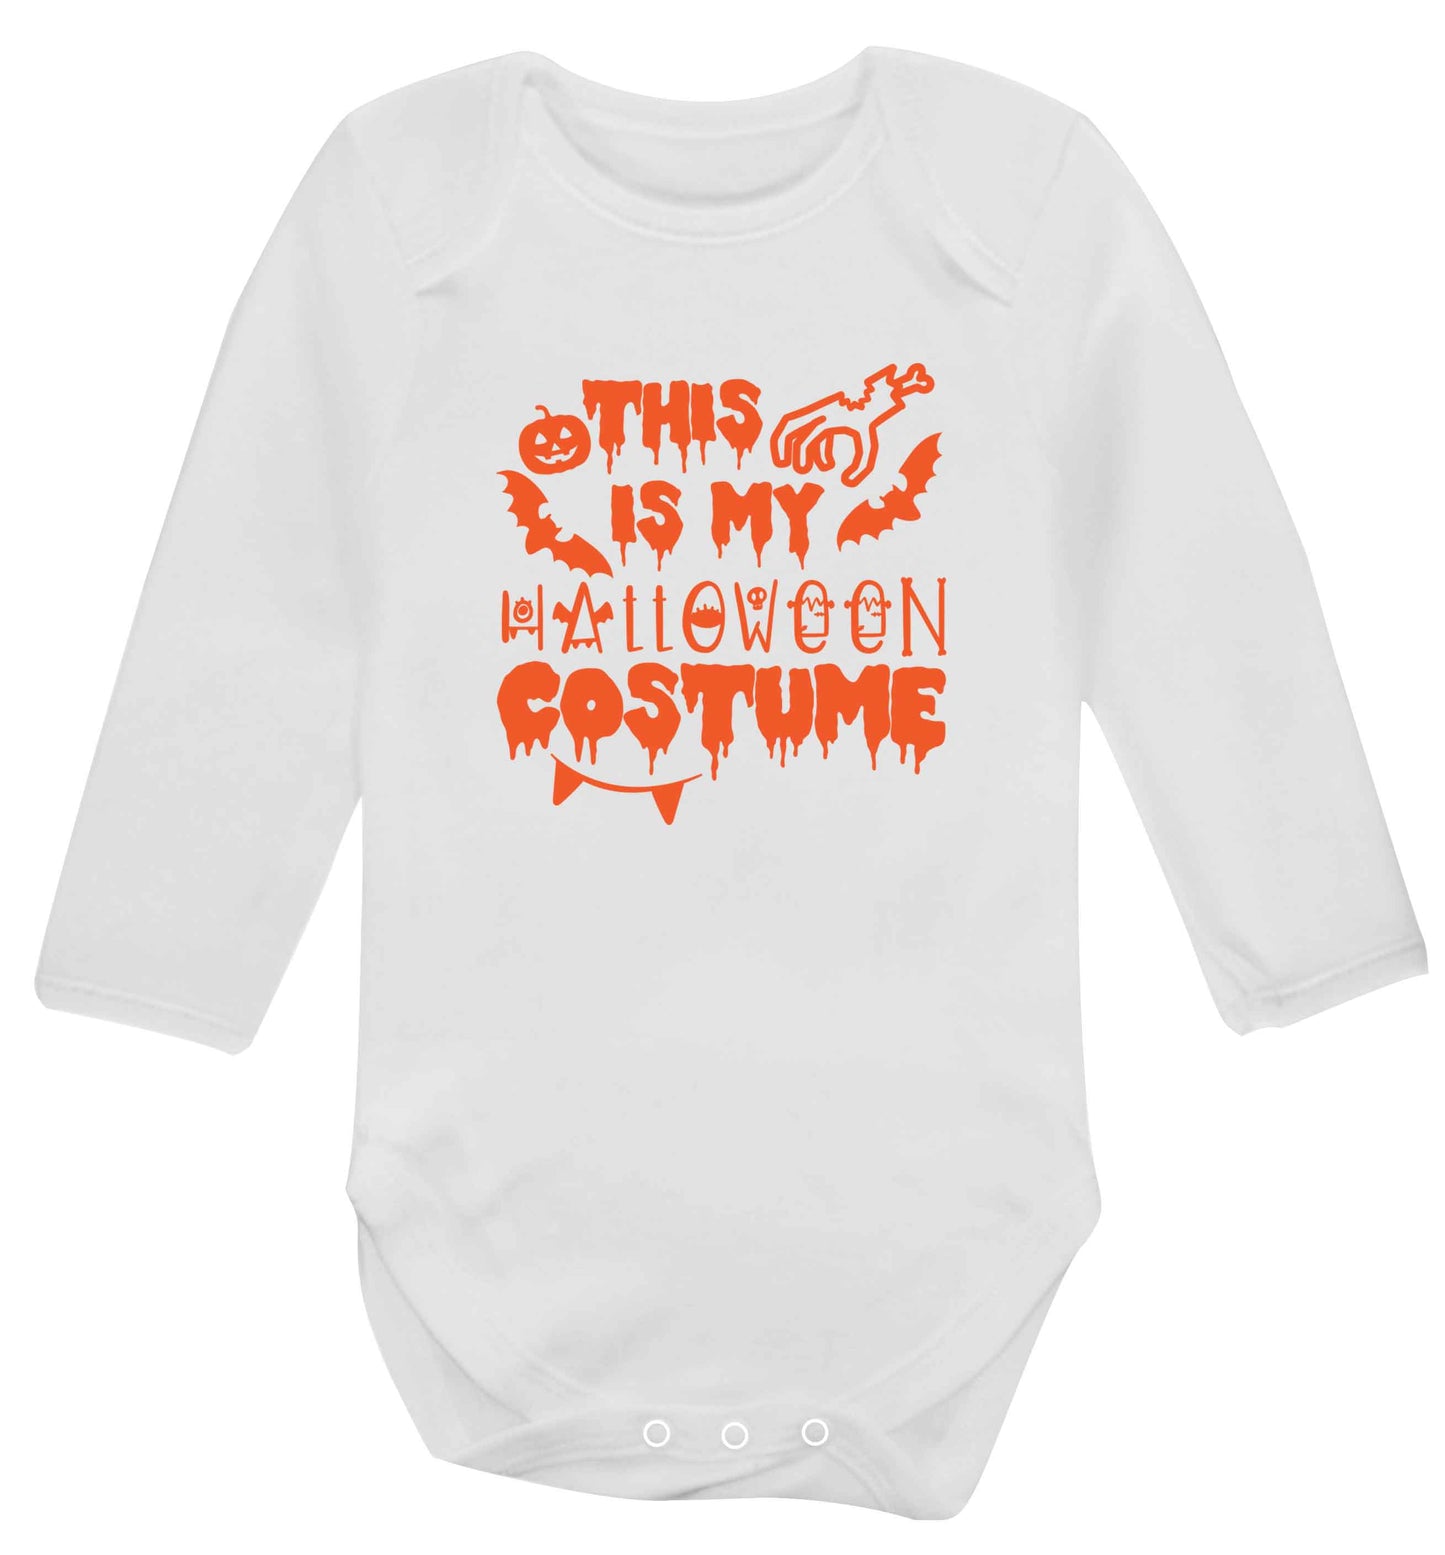 This is my halloween costume baby vest long sleeved white 6-12 months